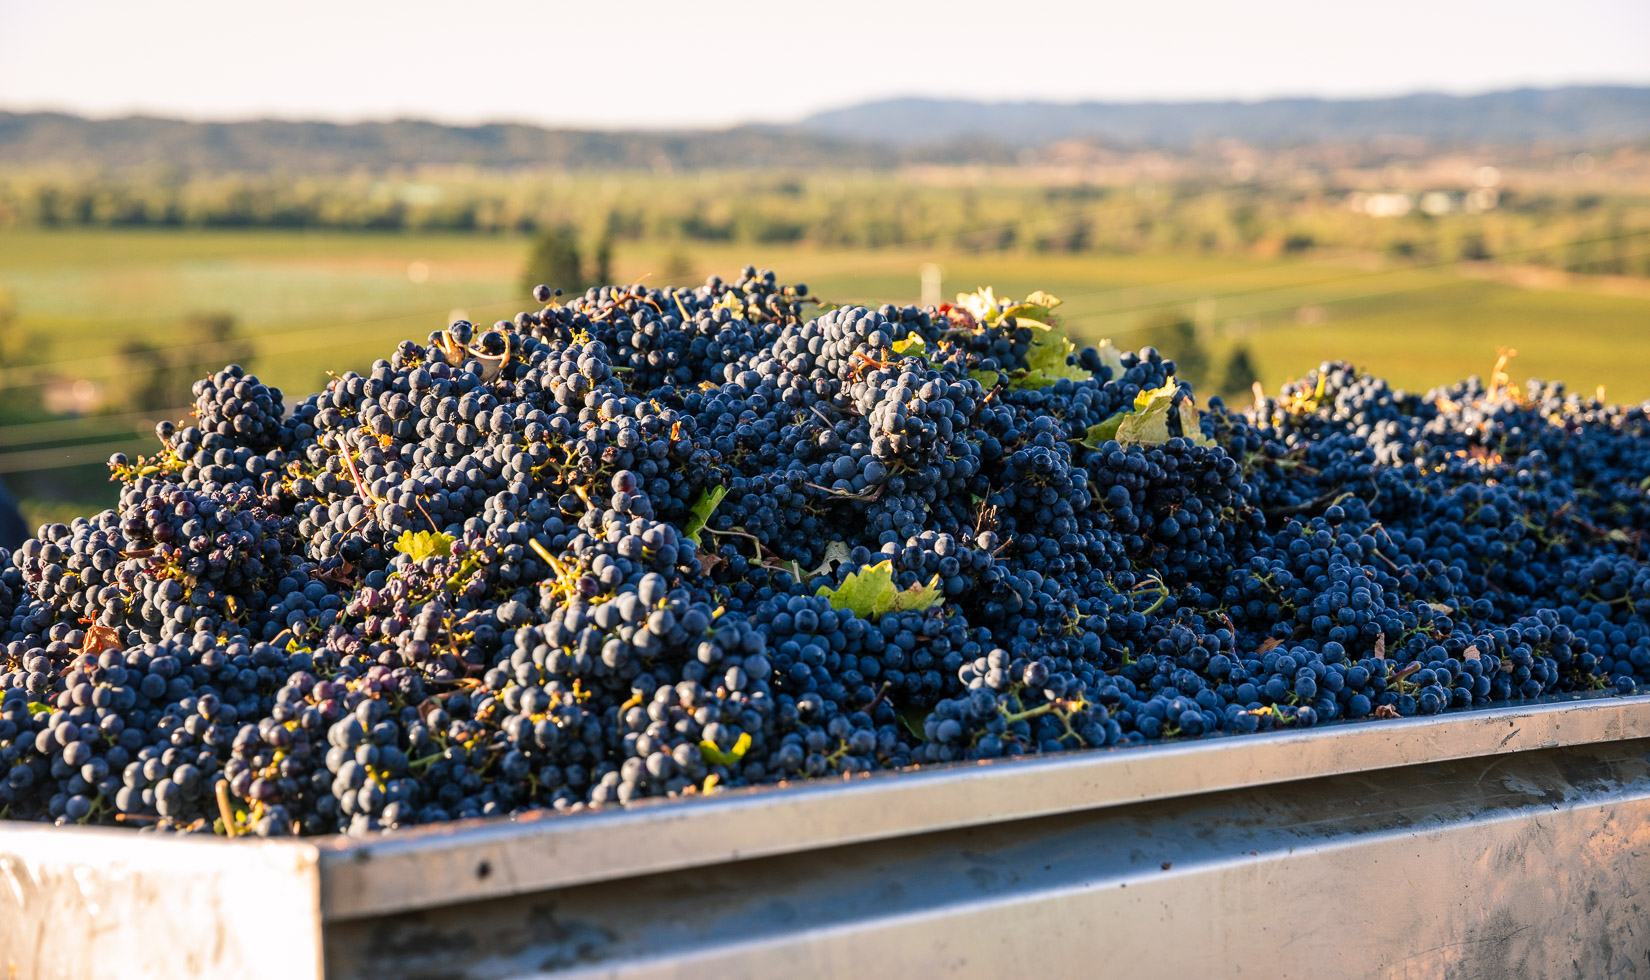 Large harvest of purple cabernet sauvignon grapes in a vat overlooking a lush green valley.